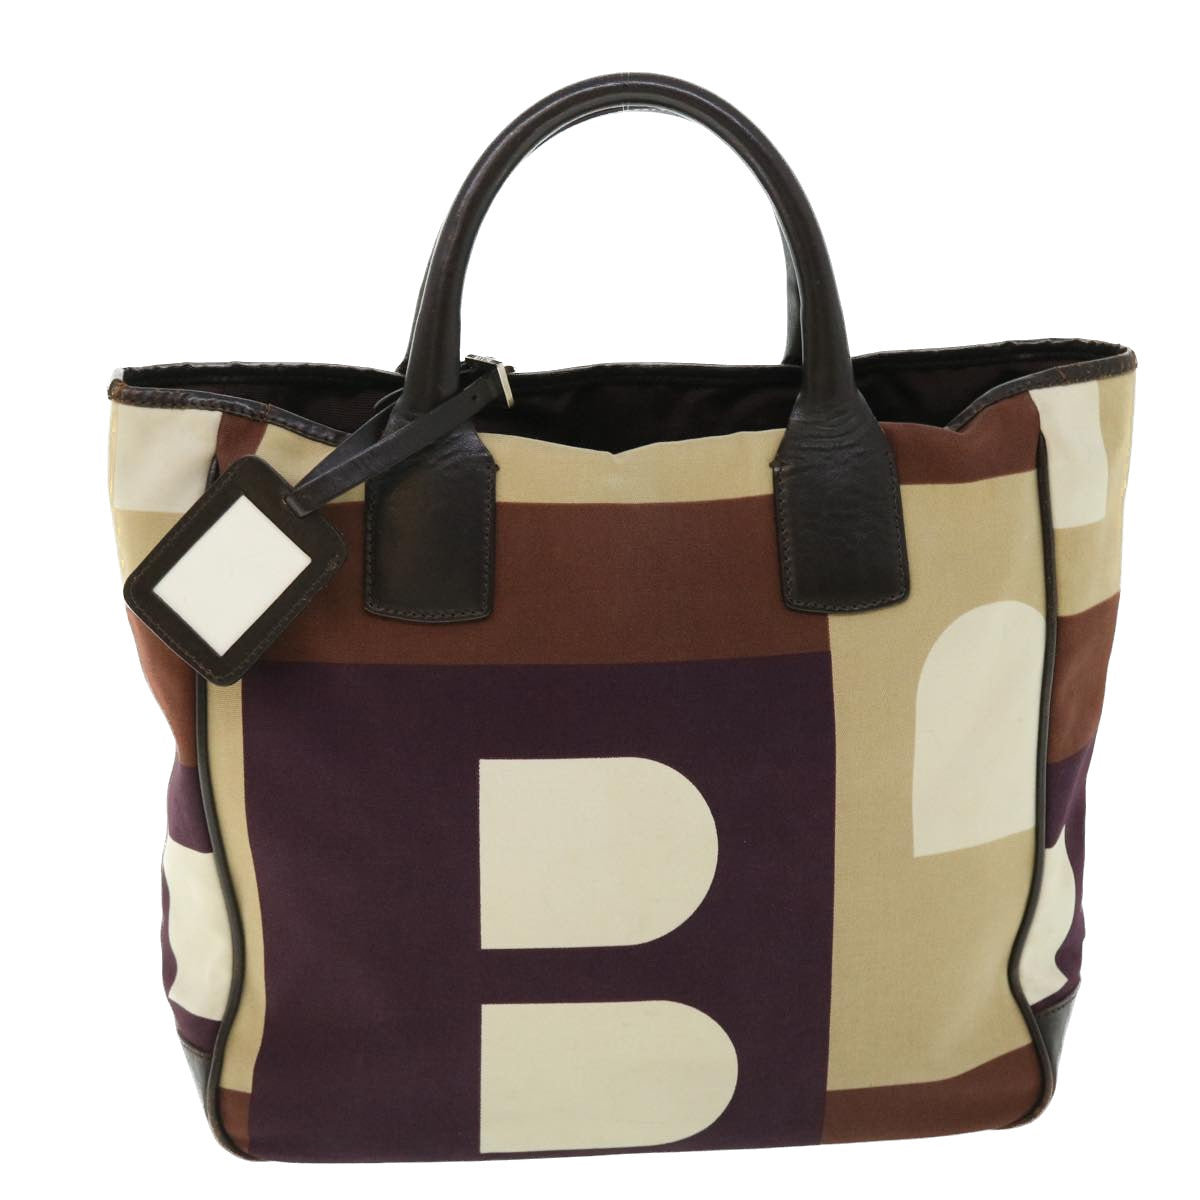 BALLY Tote Bag Canvas Brown Auth bs7659